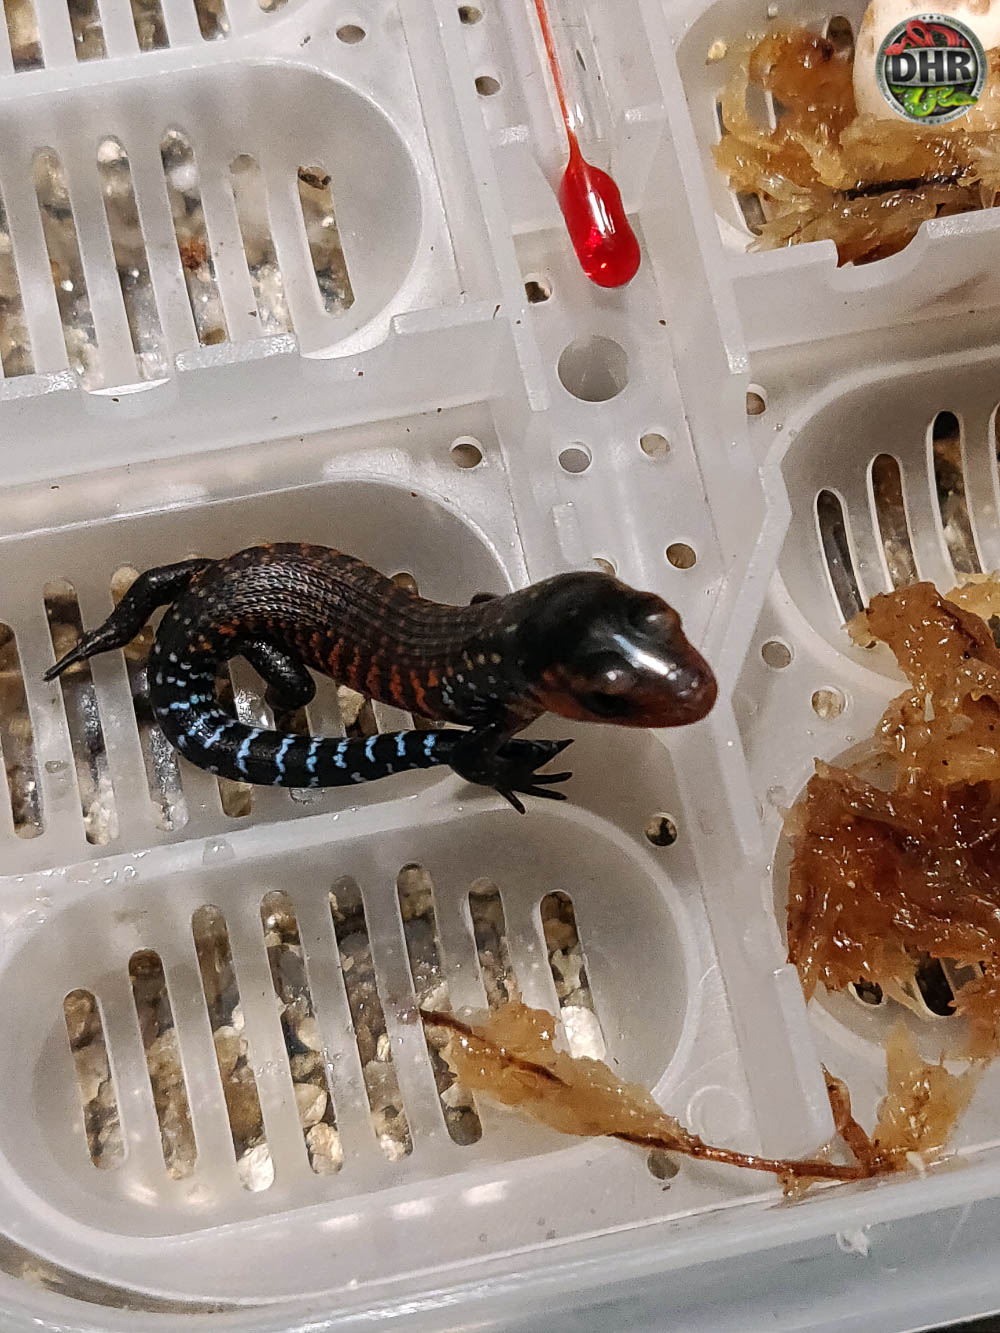 Fire Skinks are finally hatching!